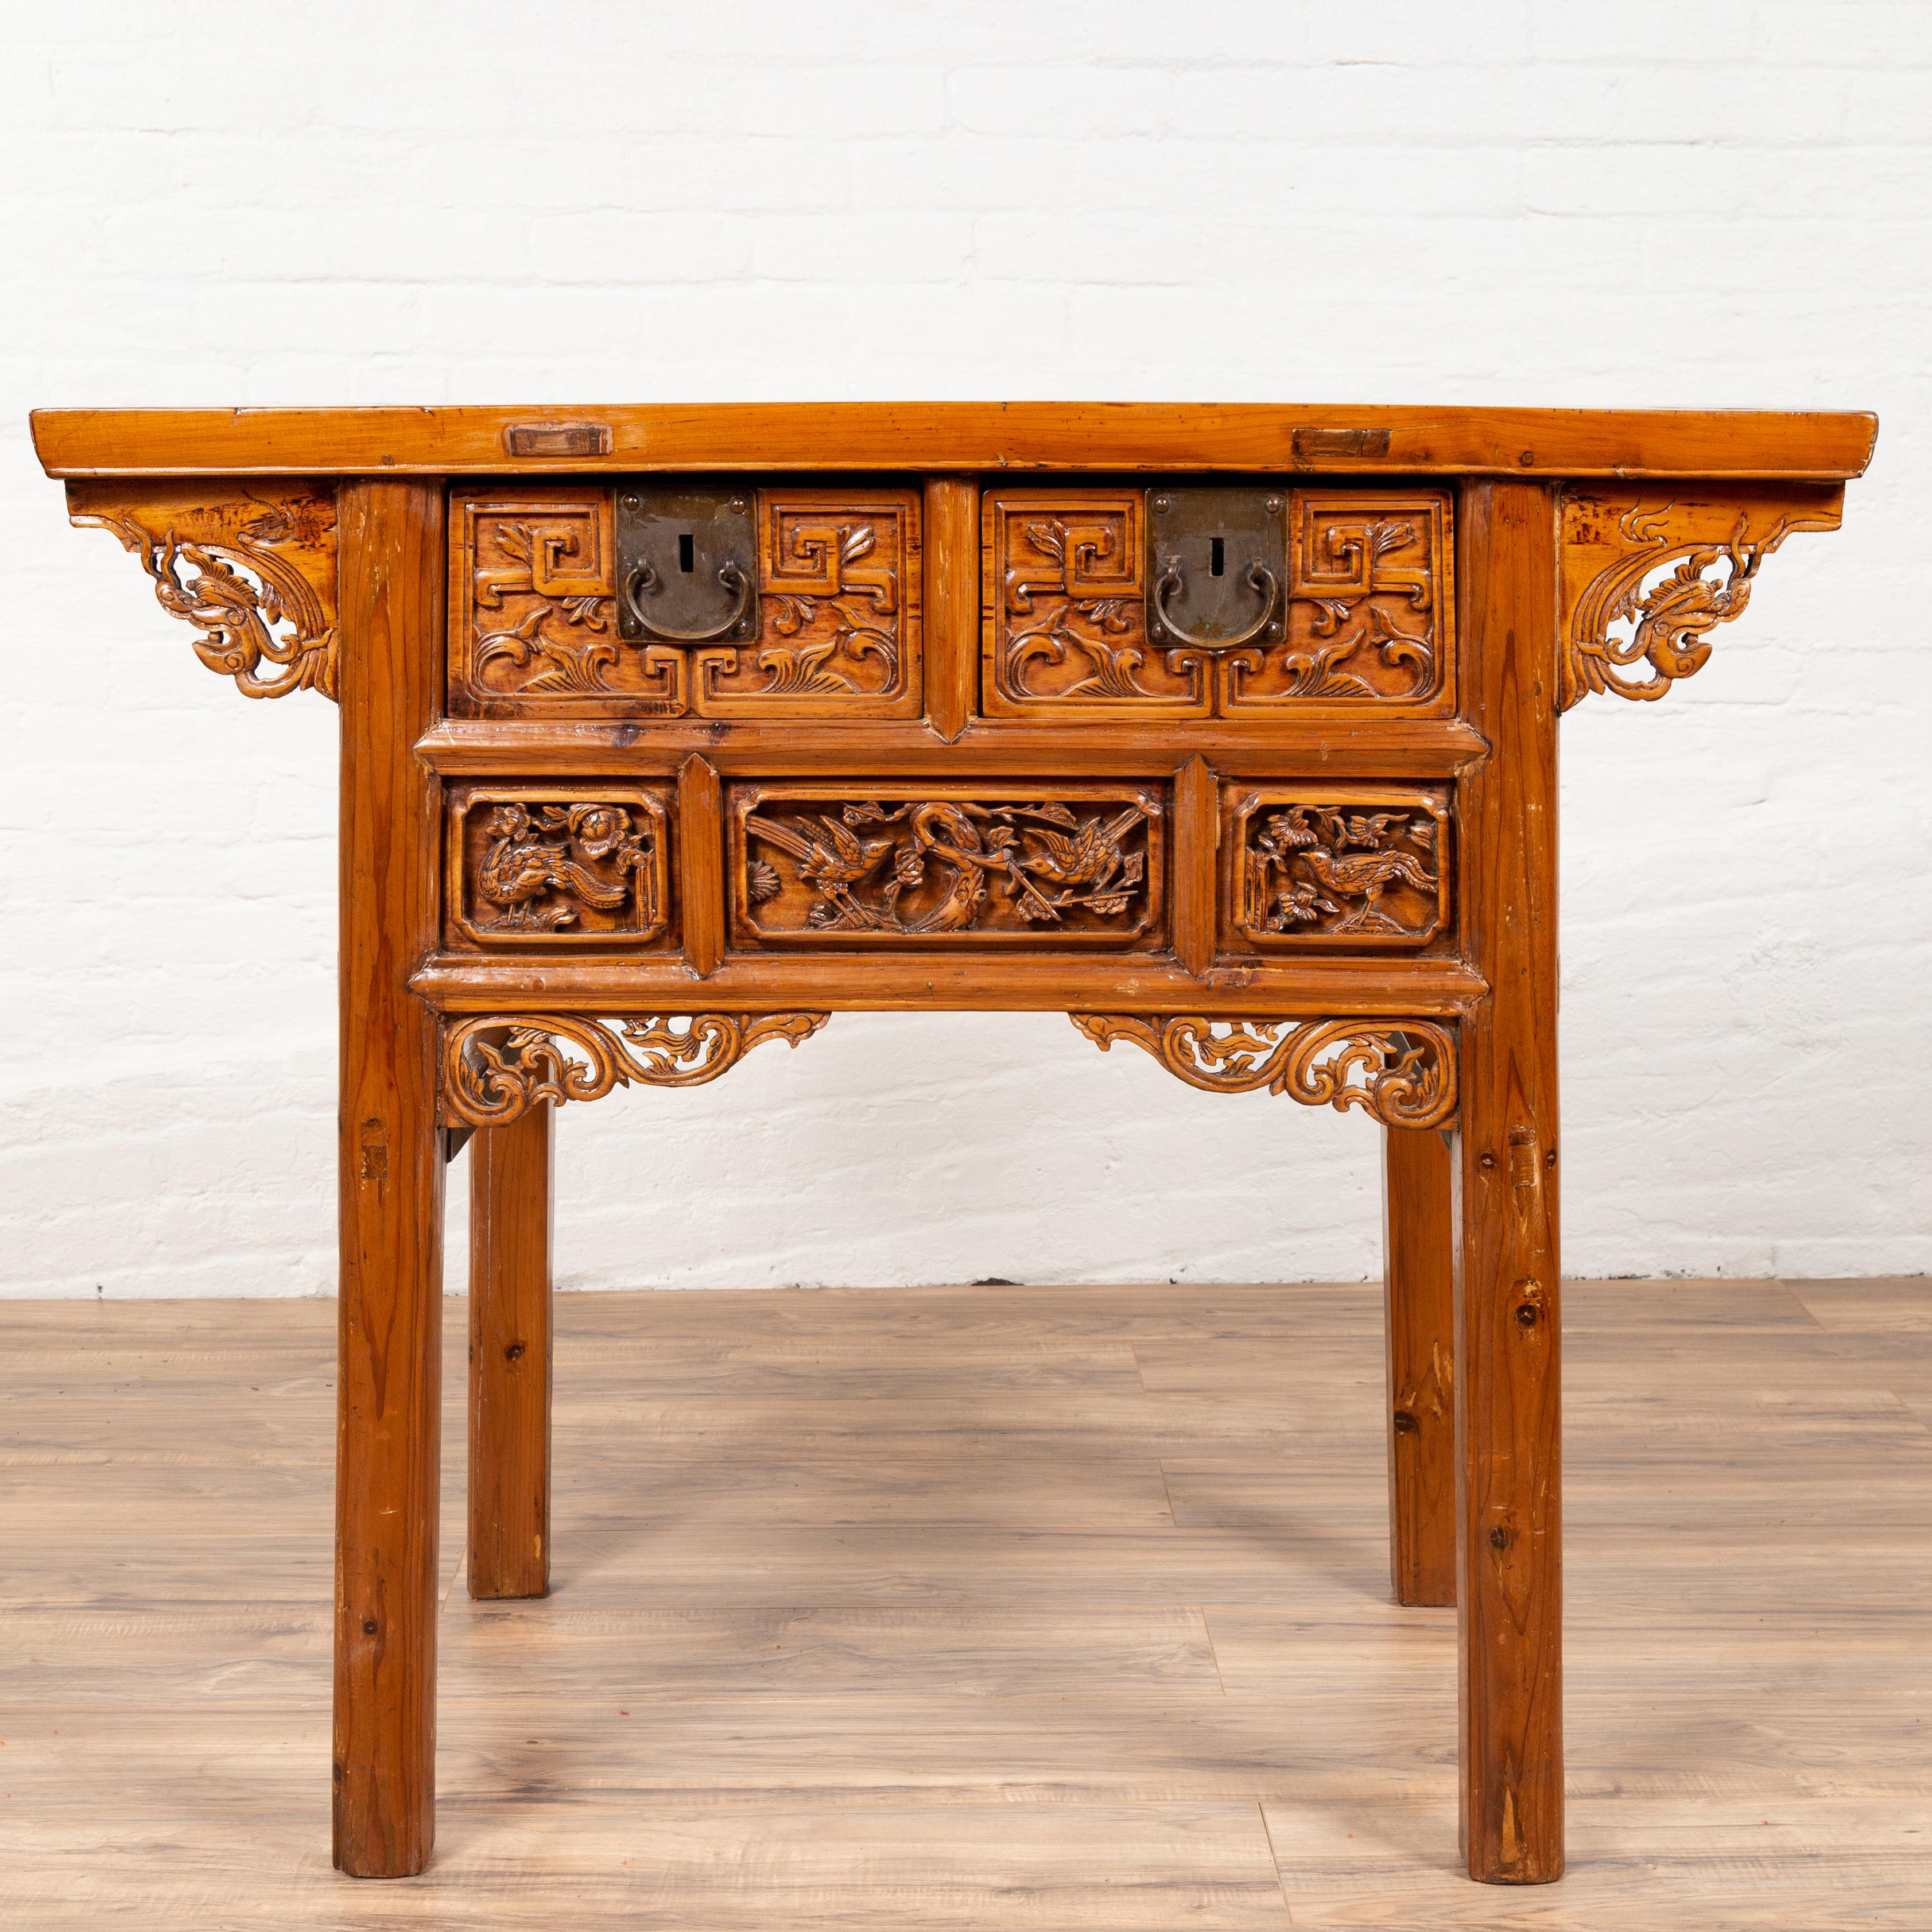 An antique Chinese display cabinet console table from the 19th century, with overhang top, hand carved décor and bronze hardware. This Chinese console table features a rectangular planked top, overhanging an exquisite façade, made of two drawers,